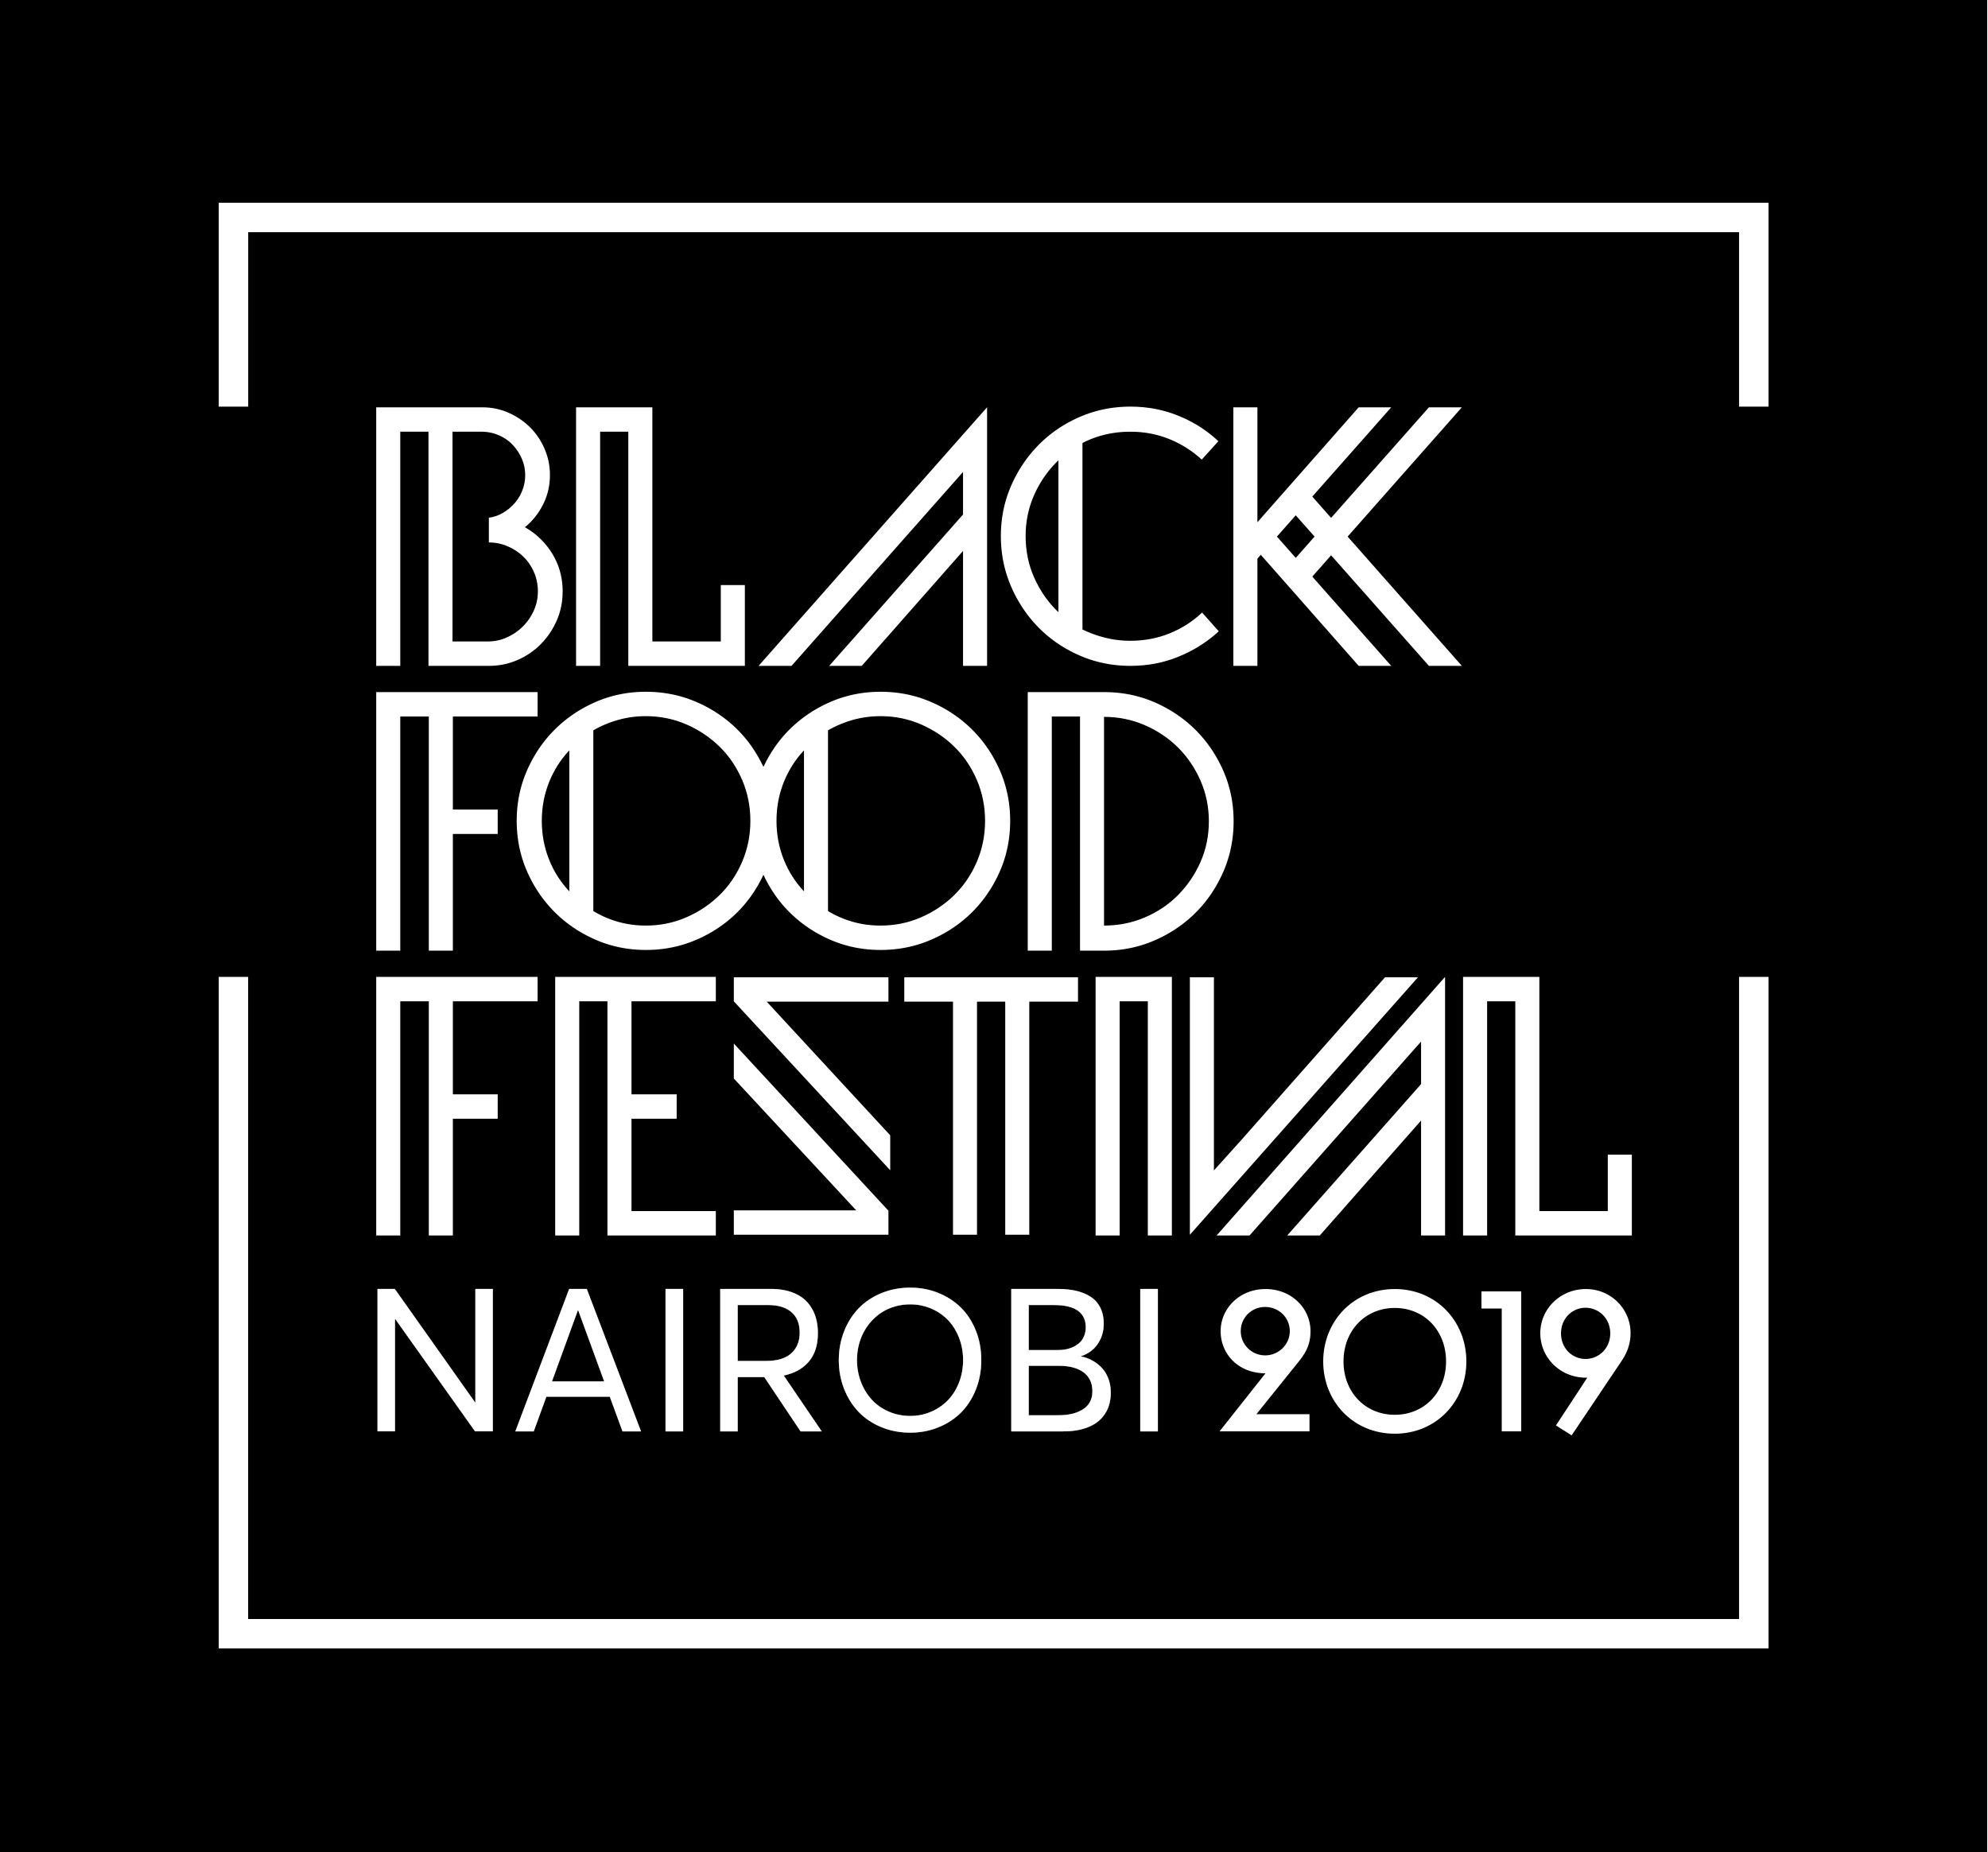 After Berlin, New York, Helsinki, Join Us For Our First Black Food Festival In Nairobi!